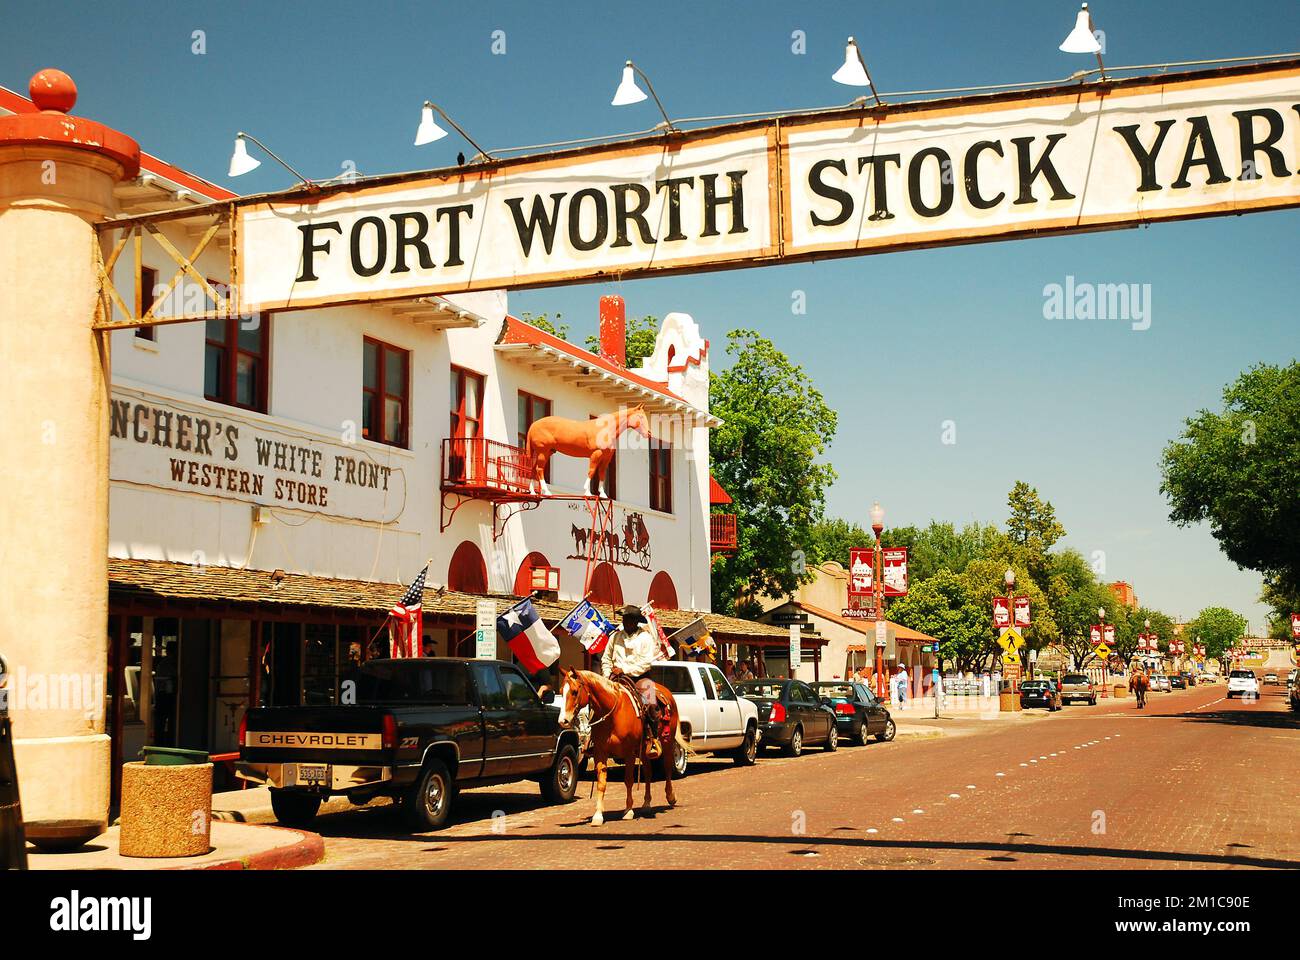 A Cowboy and sheriff patrols the Forth Worth Stock Yards in Texas Stock Photo